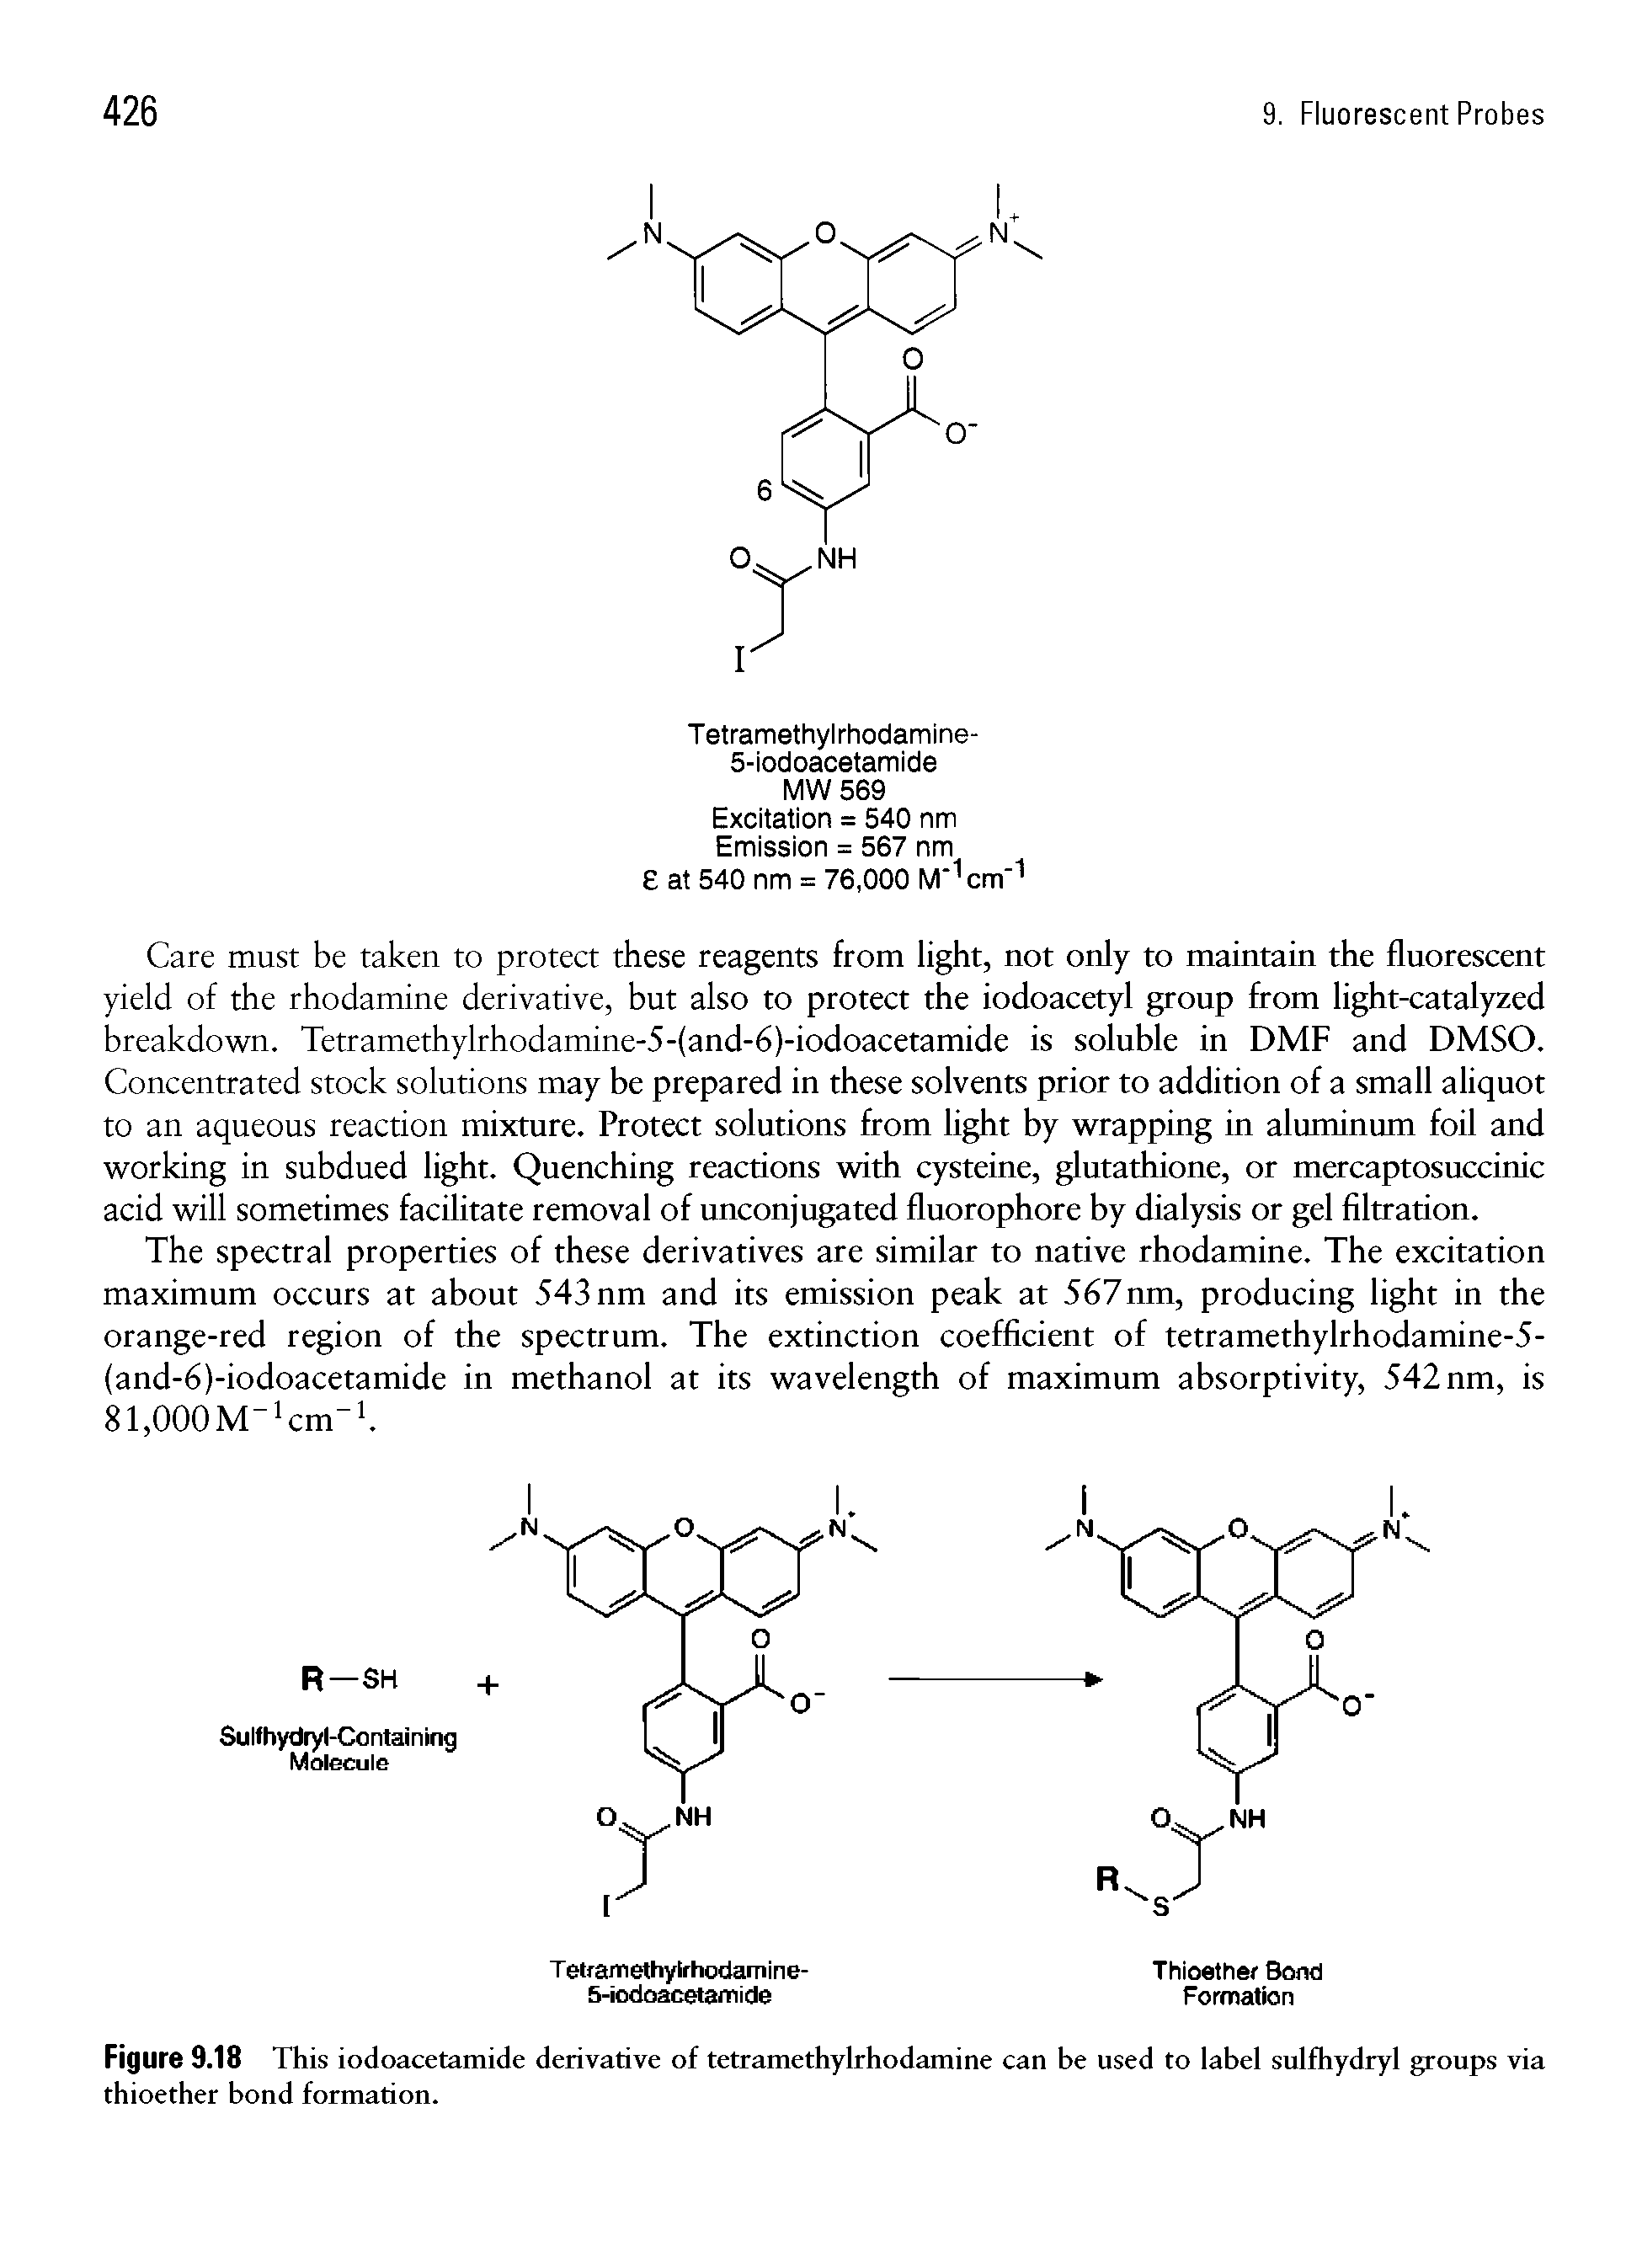 Figure 9.18 This iodoacetamide derivative of tetramethylrhodamine can be used to label sulfhydryl groups via thioether bond formation.